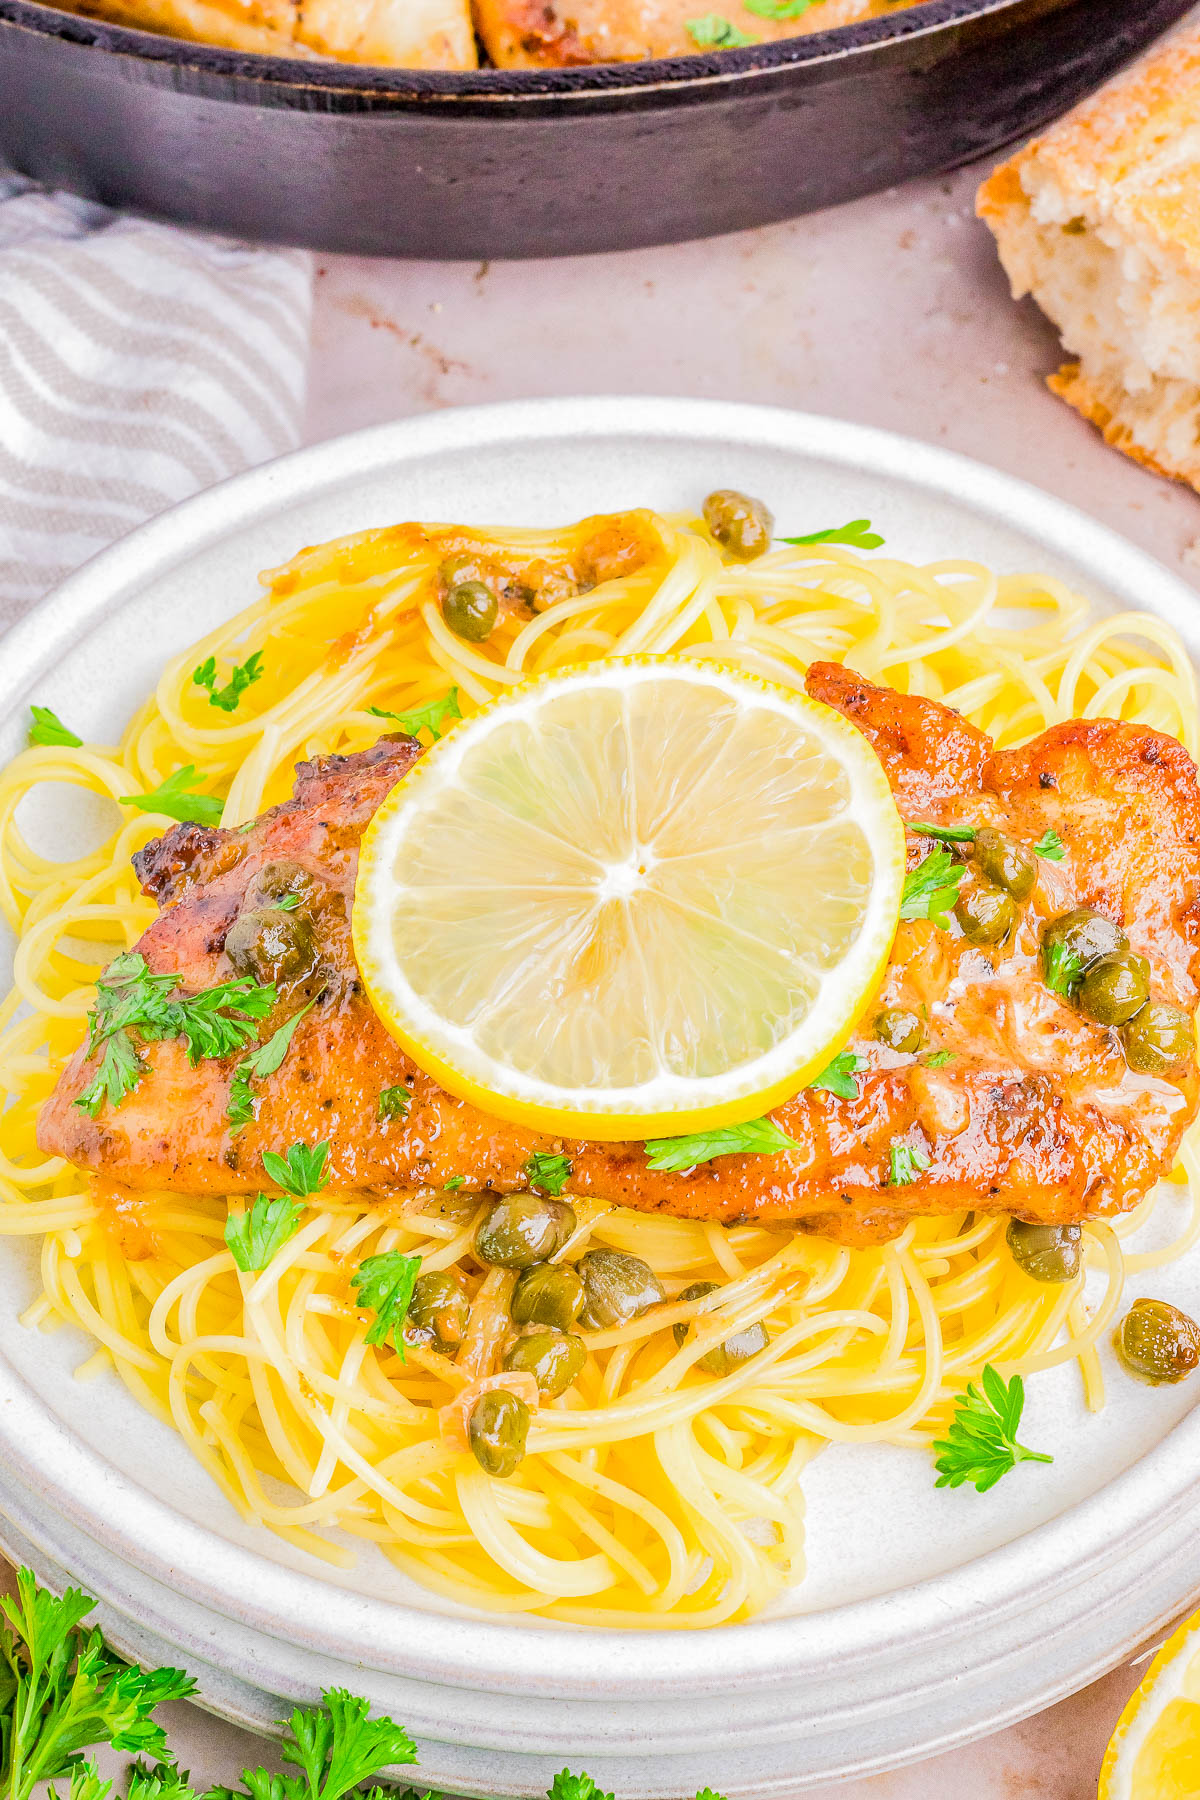 A plate of pasta topped with a grilled chicken breast, garnished with lemon slices, capers, and parsley.